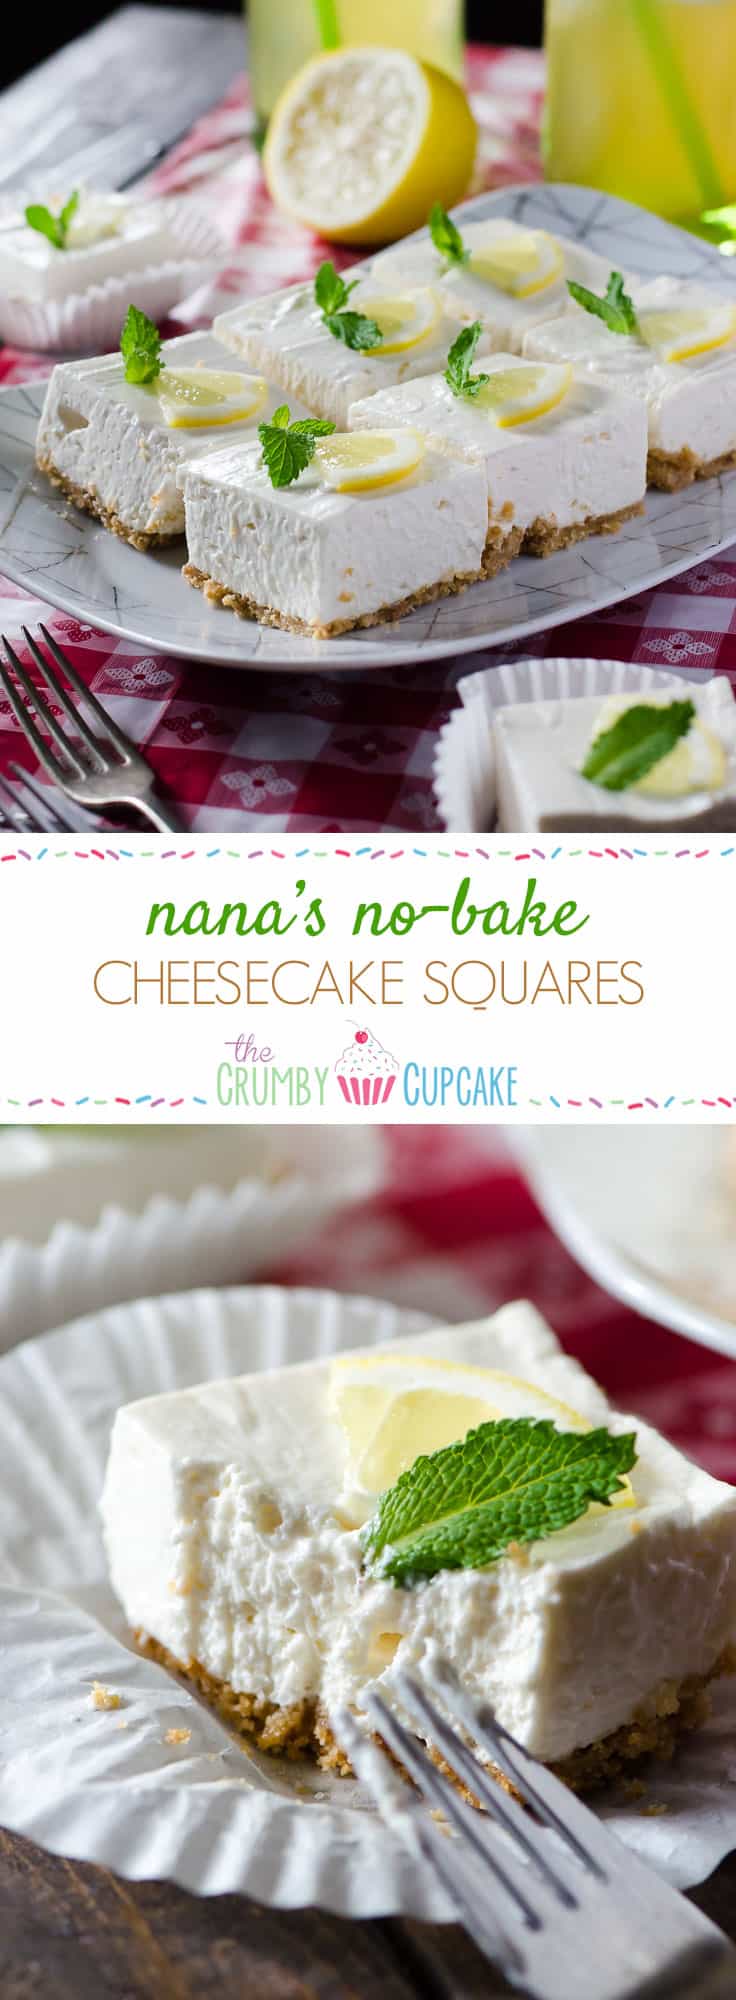 Light, fluffy, and totally refreshing, Nana’s No-Bake Cheesecake Squares are a knockout ending to a steamy summer barbecue or picnic! Make a double batch to share at your next pool party!